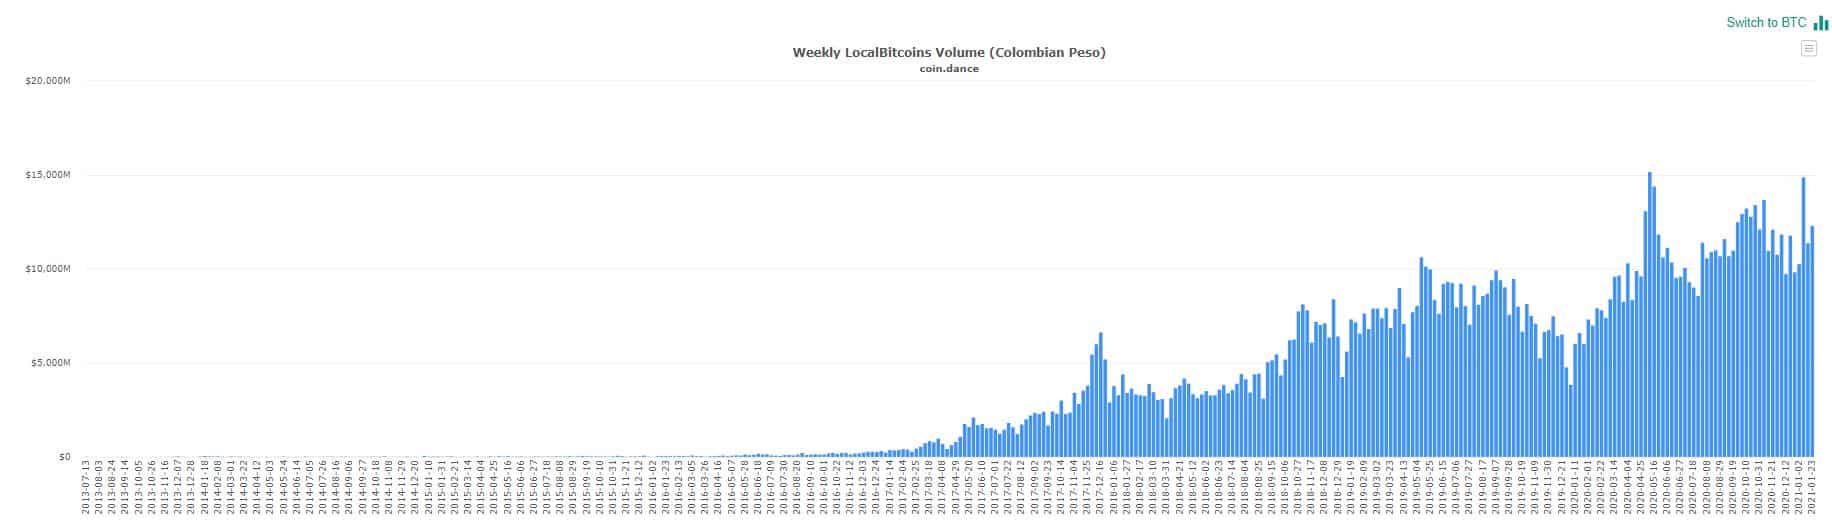 Bitcoin P2P Trading Volume On LocalBitcoins Colombia. Source: CoinDance